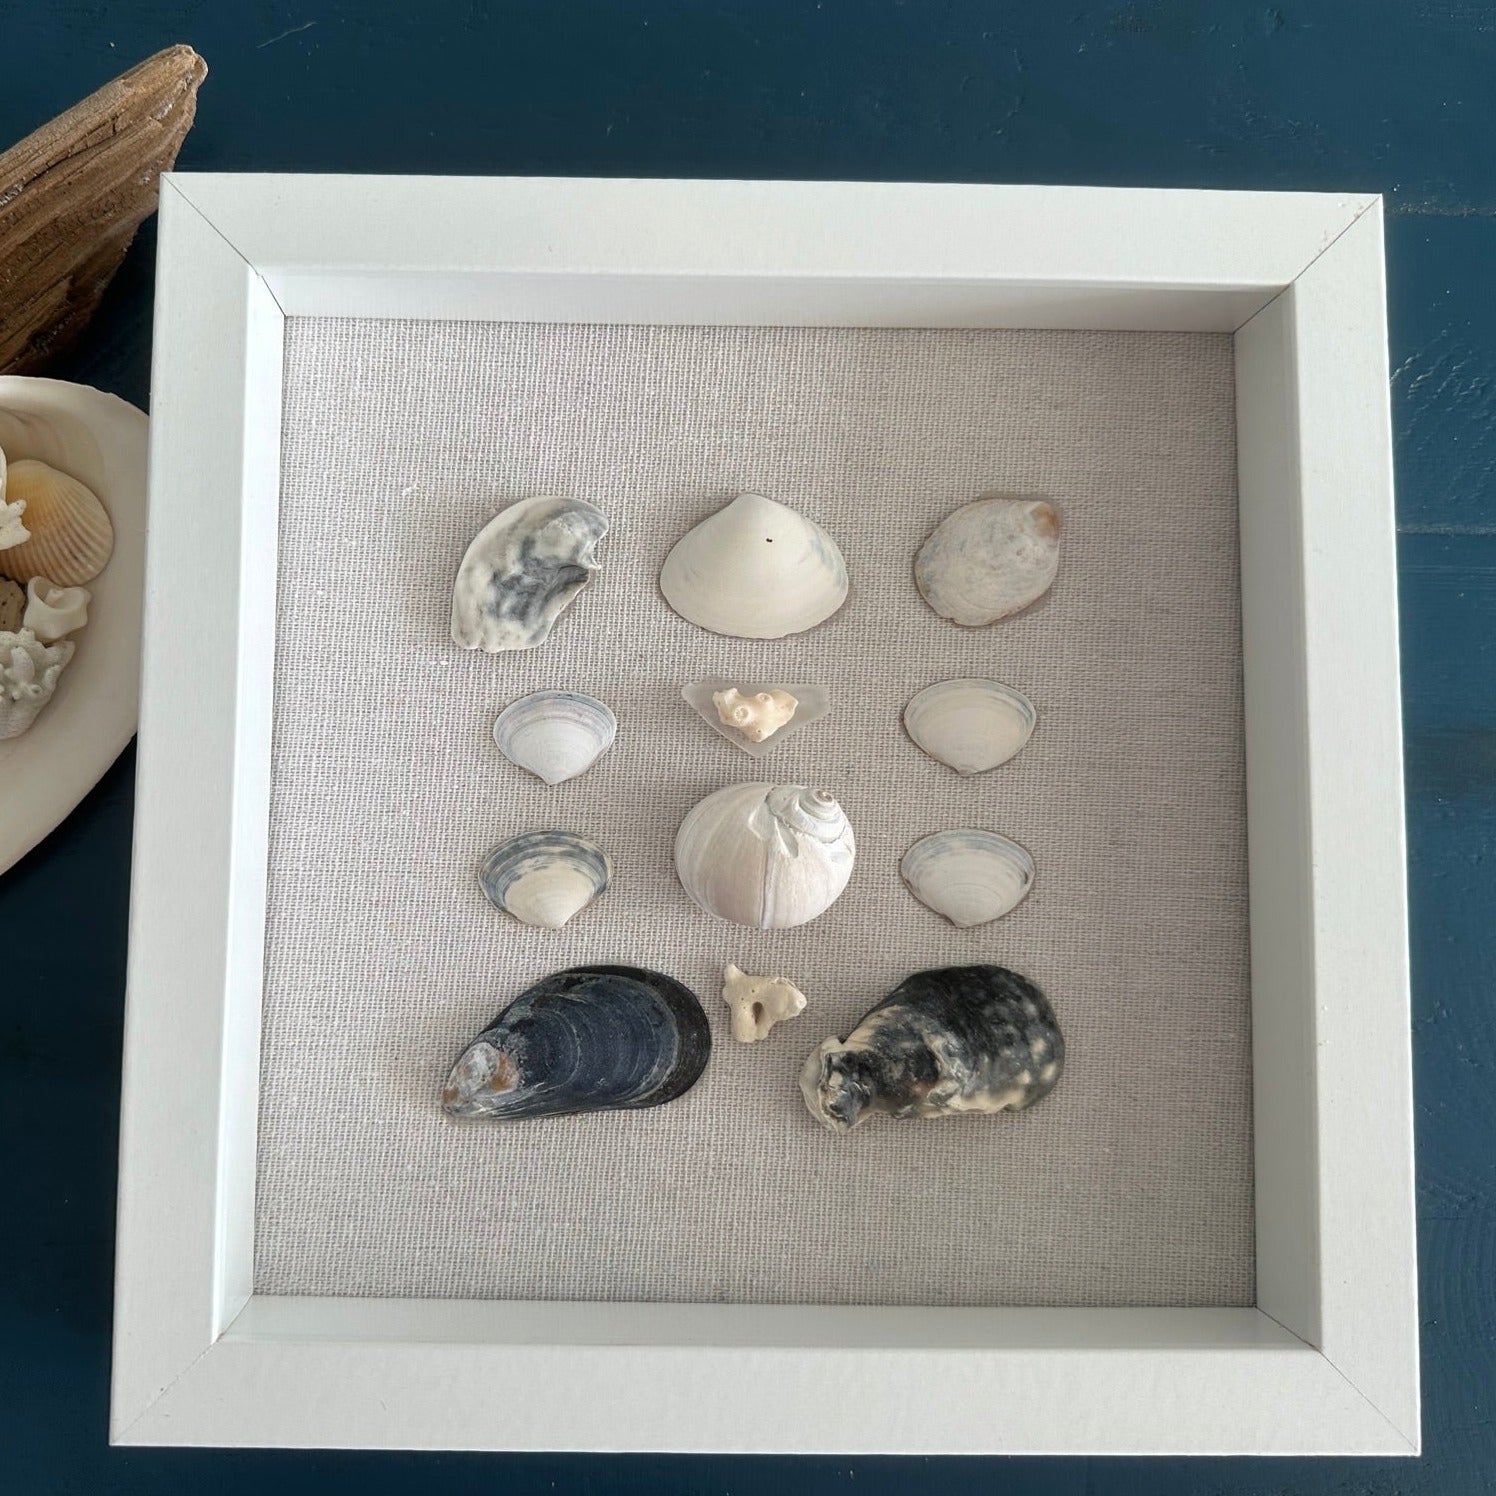 Seashell Art mussel & clam shell 8x8 shadow box by jacqueline mb designs front view